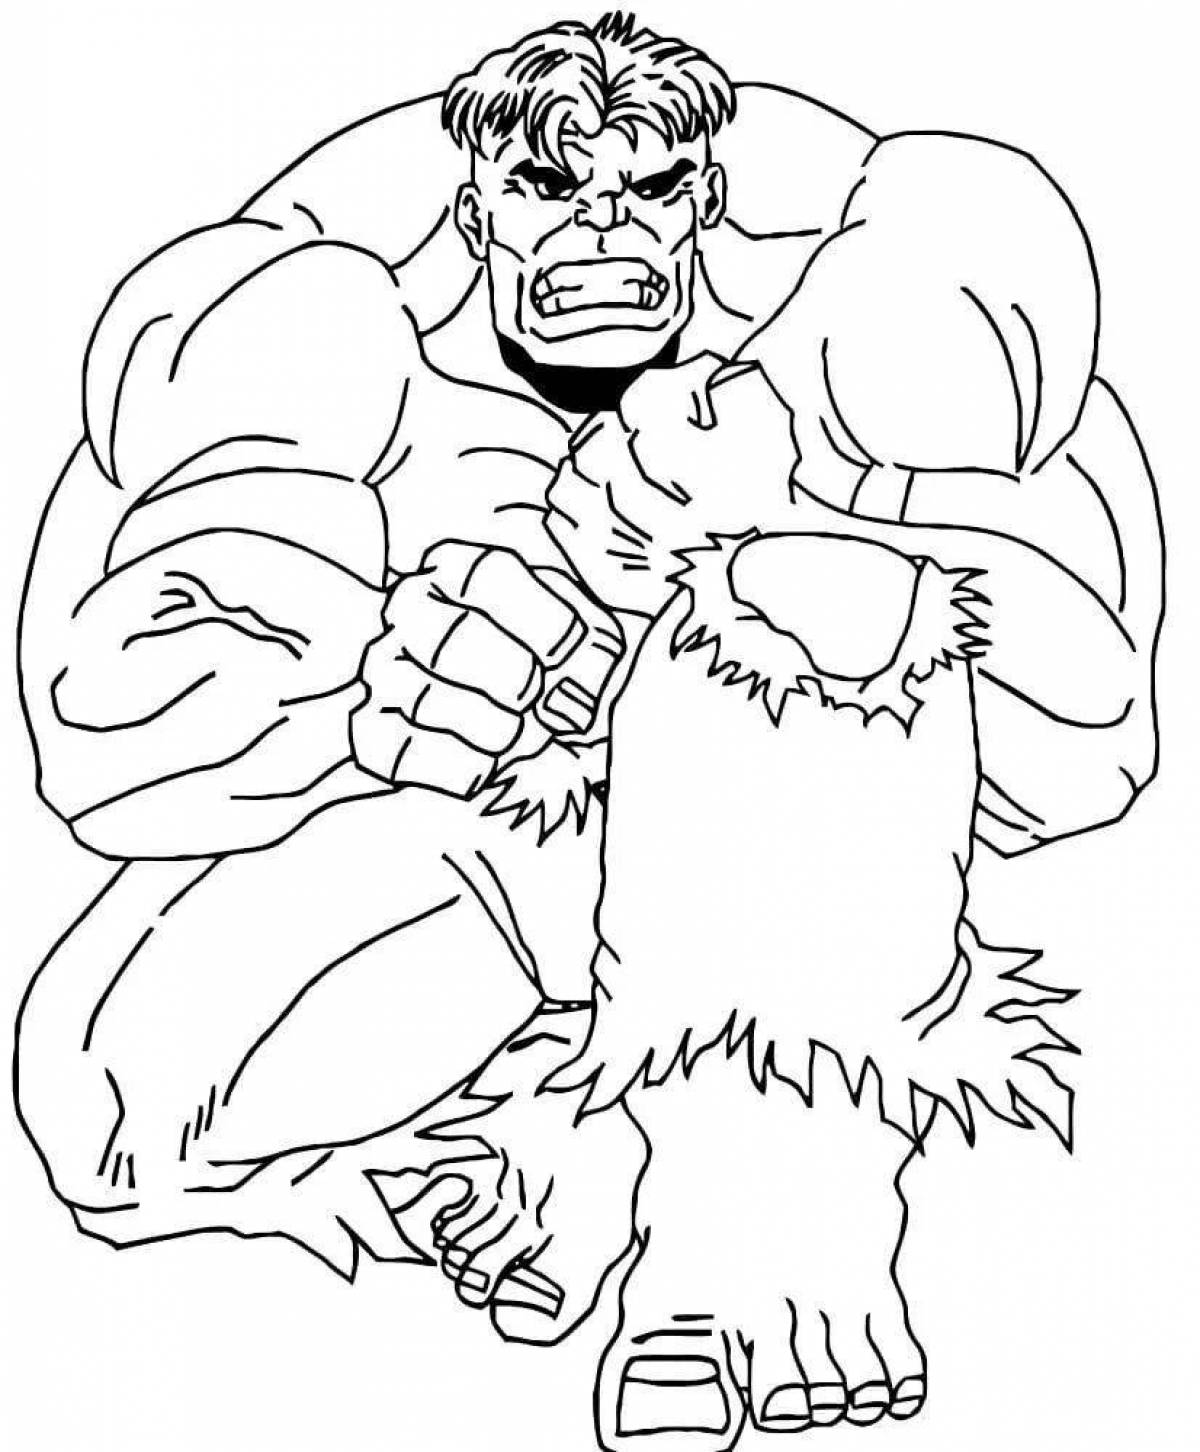 Amazing superhero coloring pages for 4-5 year olds